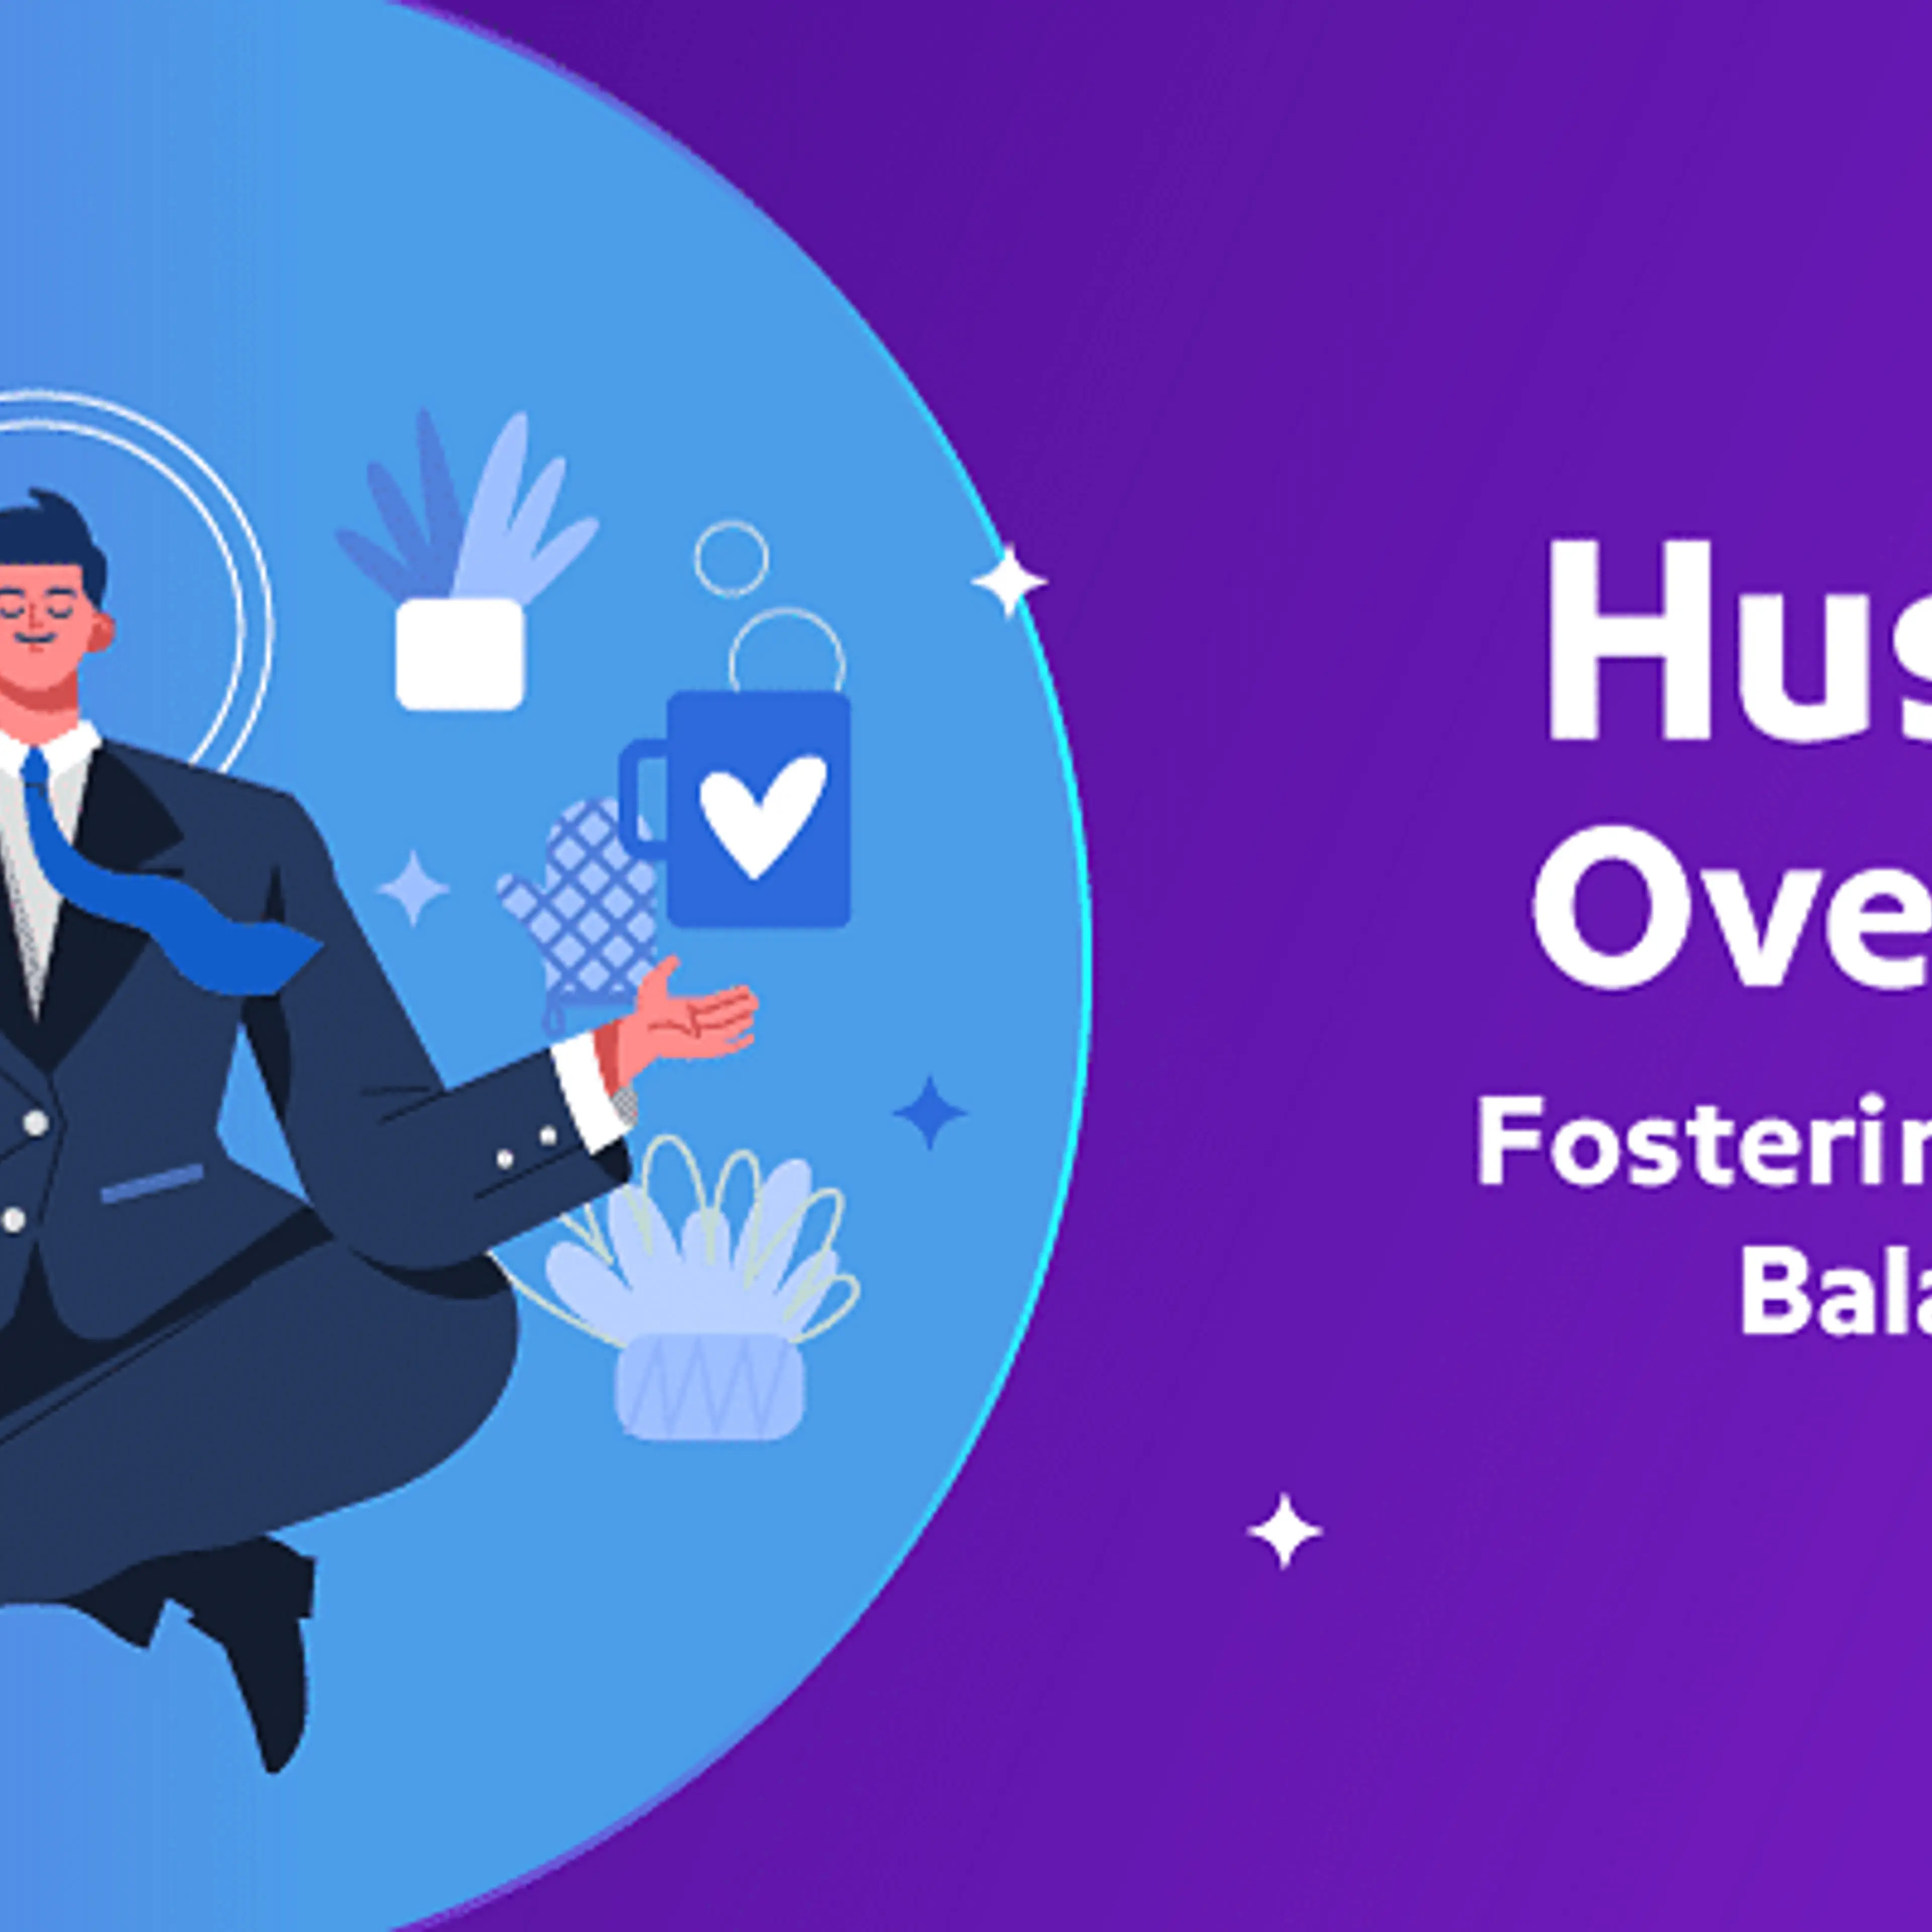 Hustle is overrated: Fostering work-life balance in tech at PhonePe